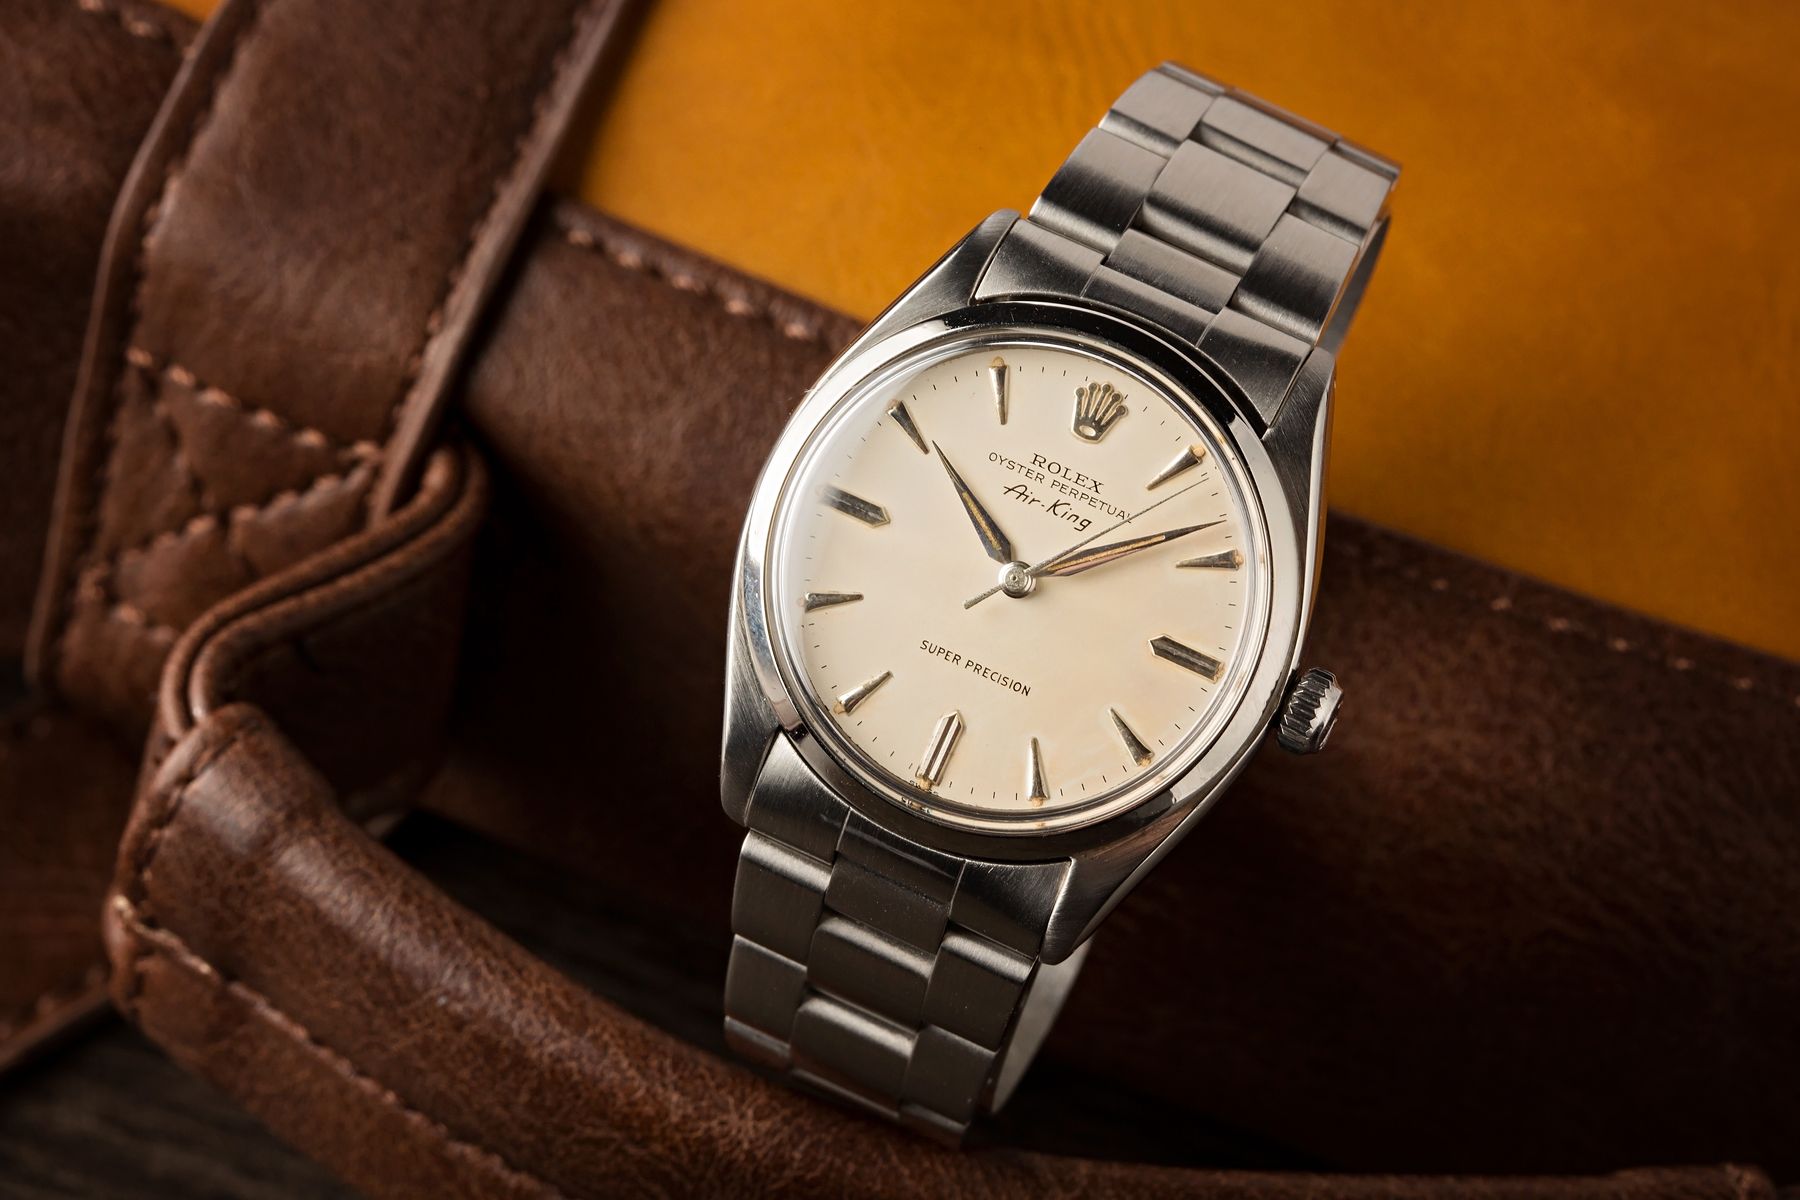 The Best Small Watches for Men